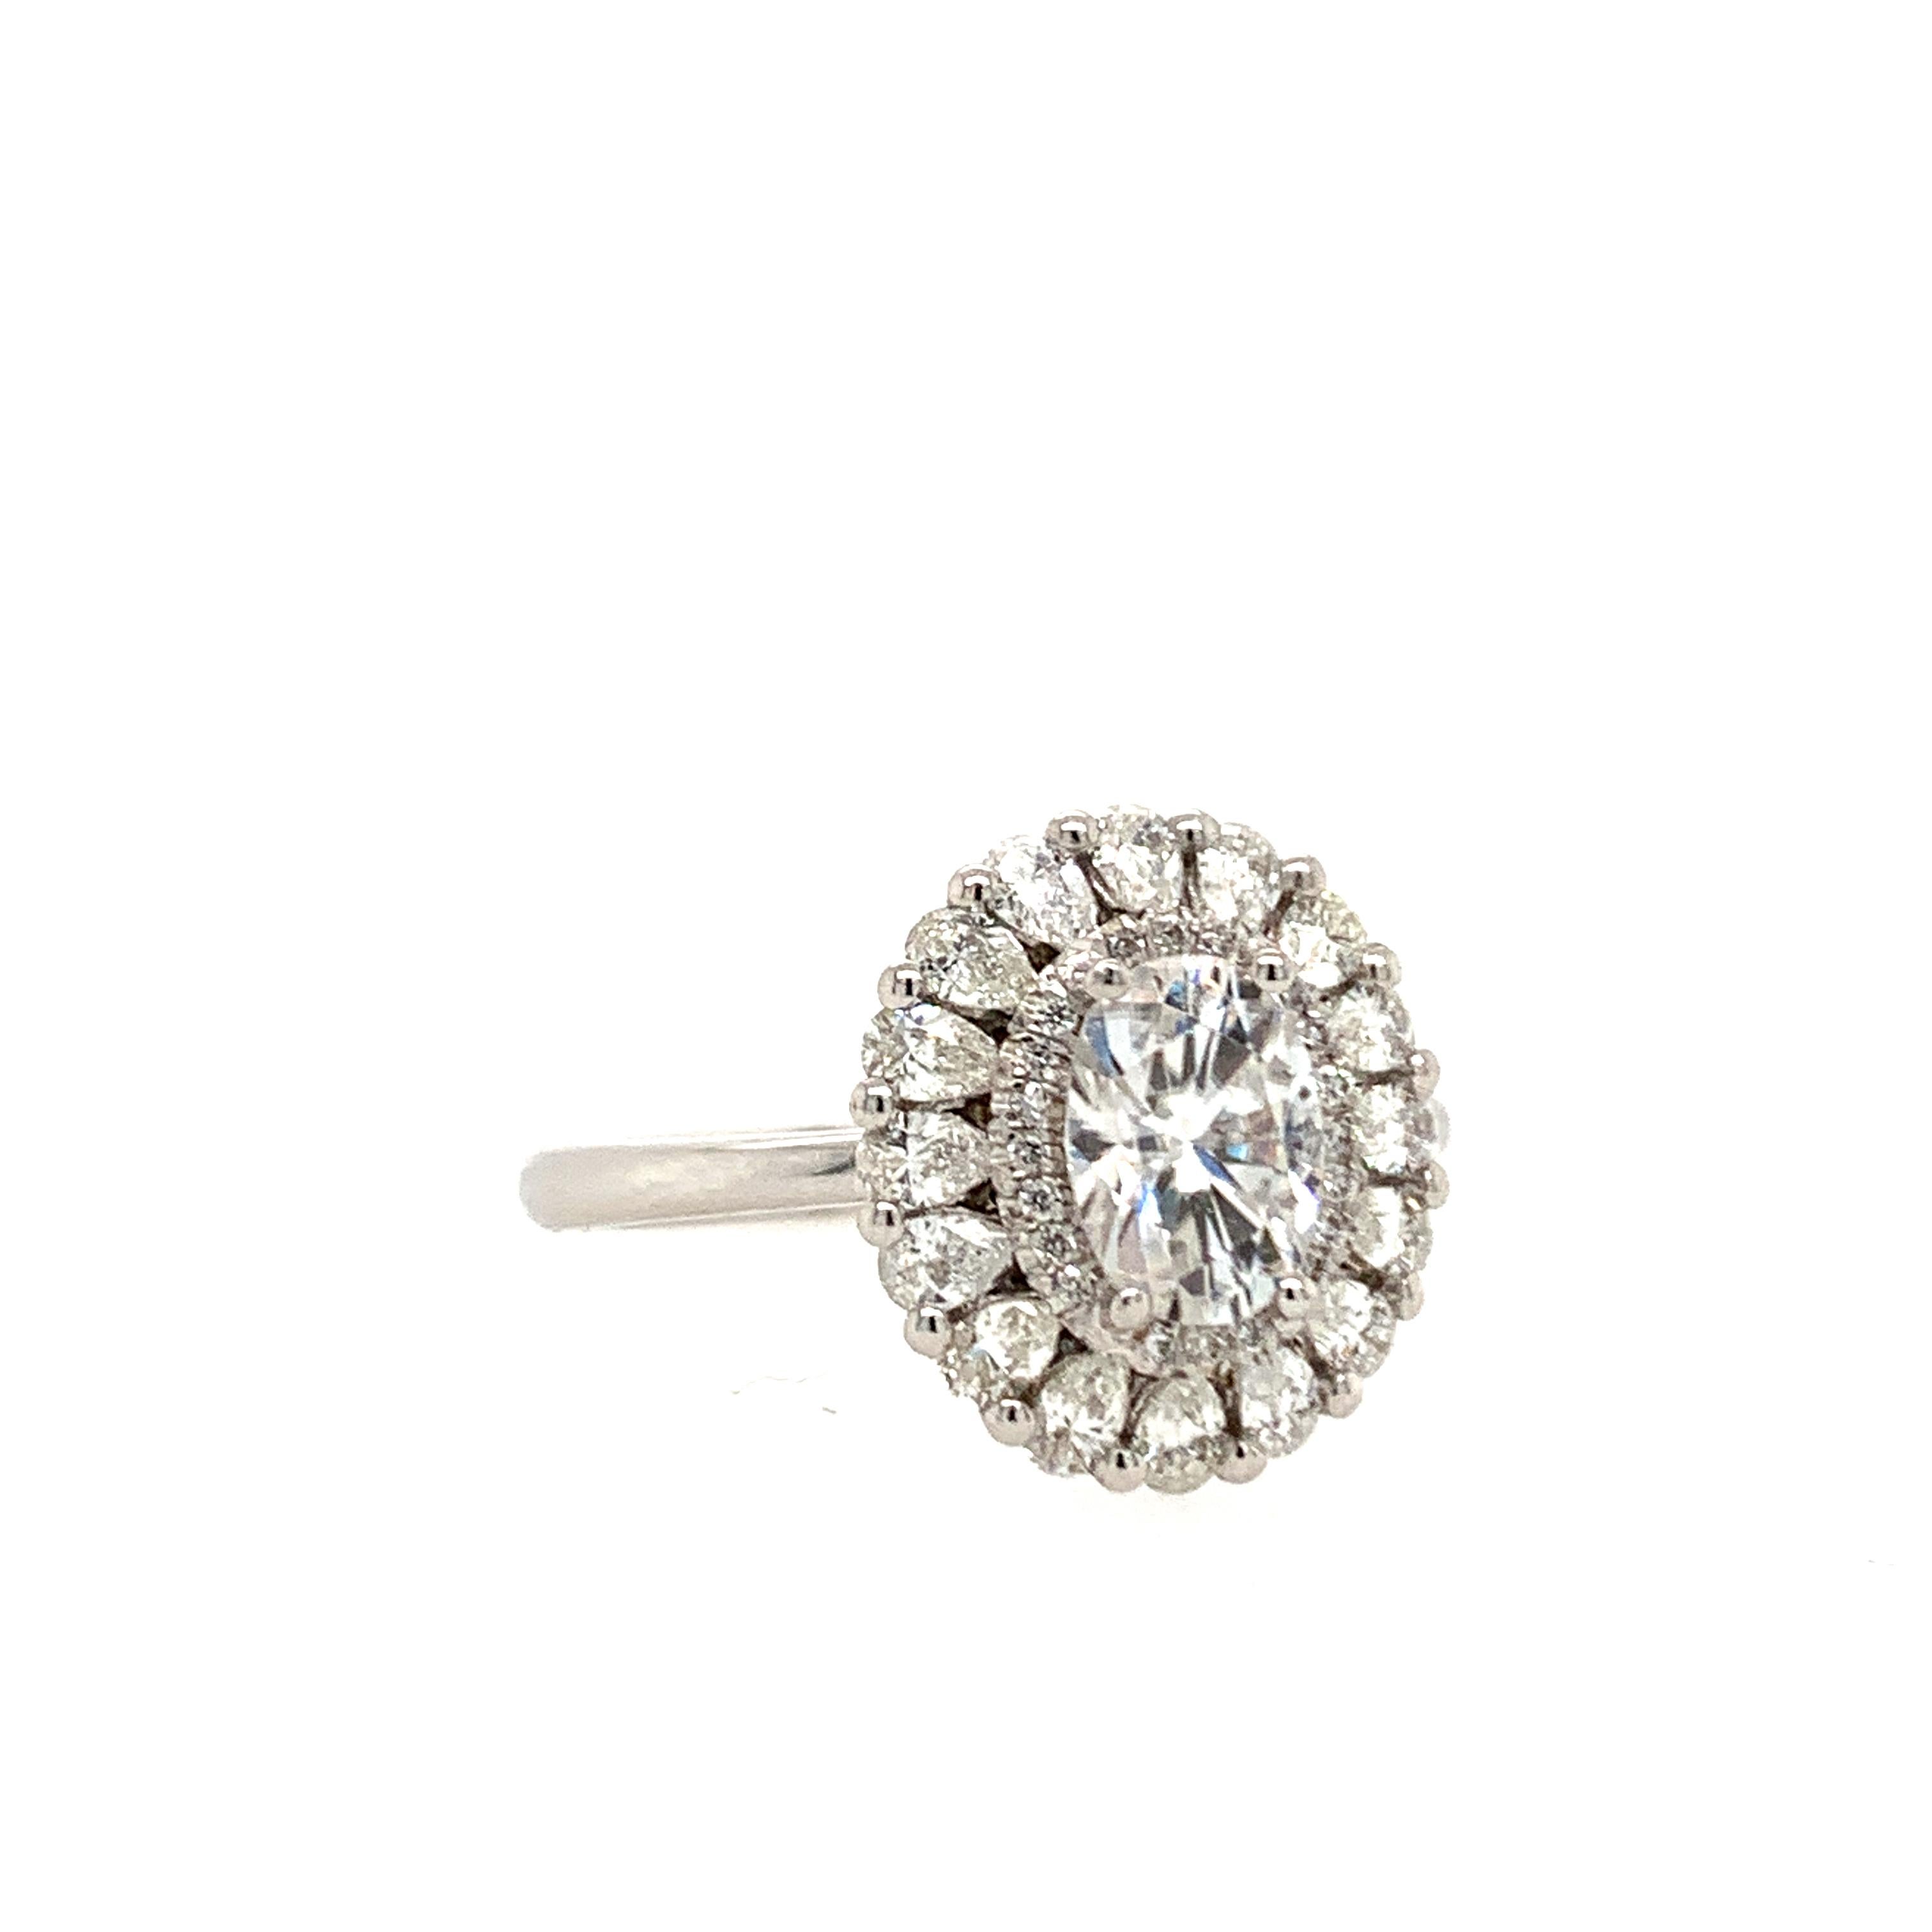 This beautiful ring flaunts a 0.80 carat oval-cut natural white diamond surrounded by a diamond halo and set atop a bed of pear-shaped white diamonds.

Set in 14K white gold.

Center stone: Natural white diamond - 0.80 carat, color G, clarity SI1